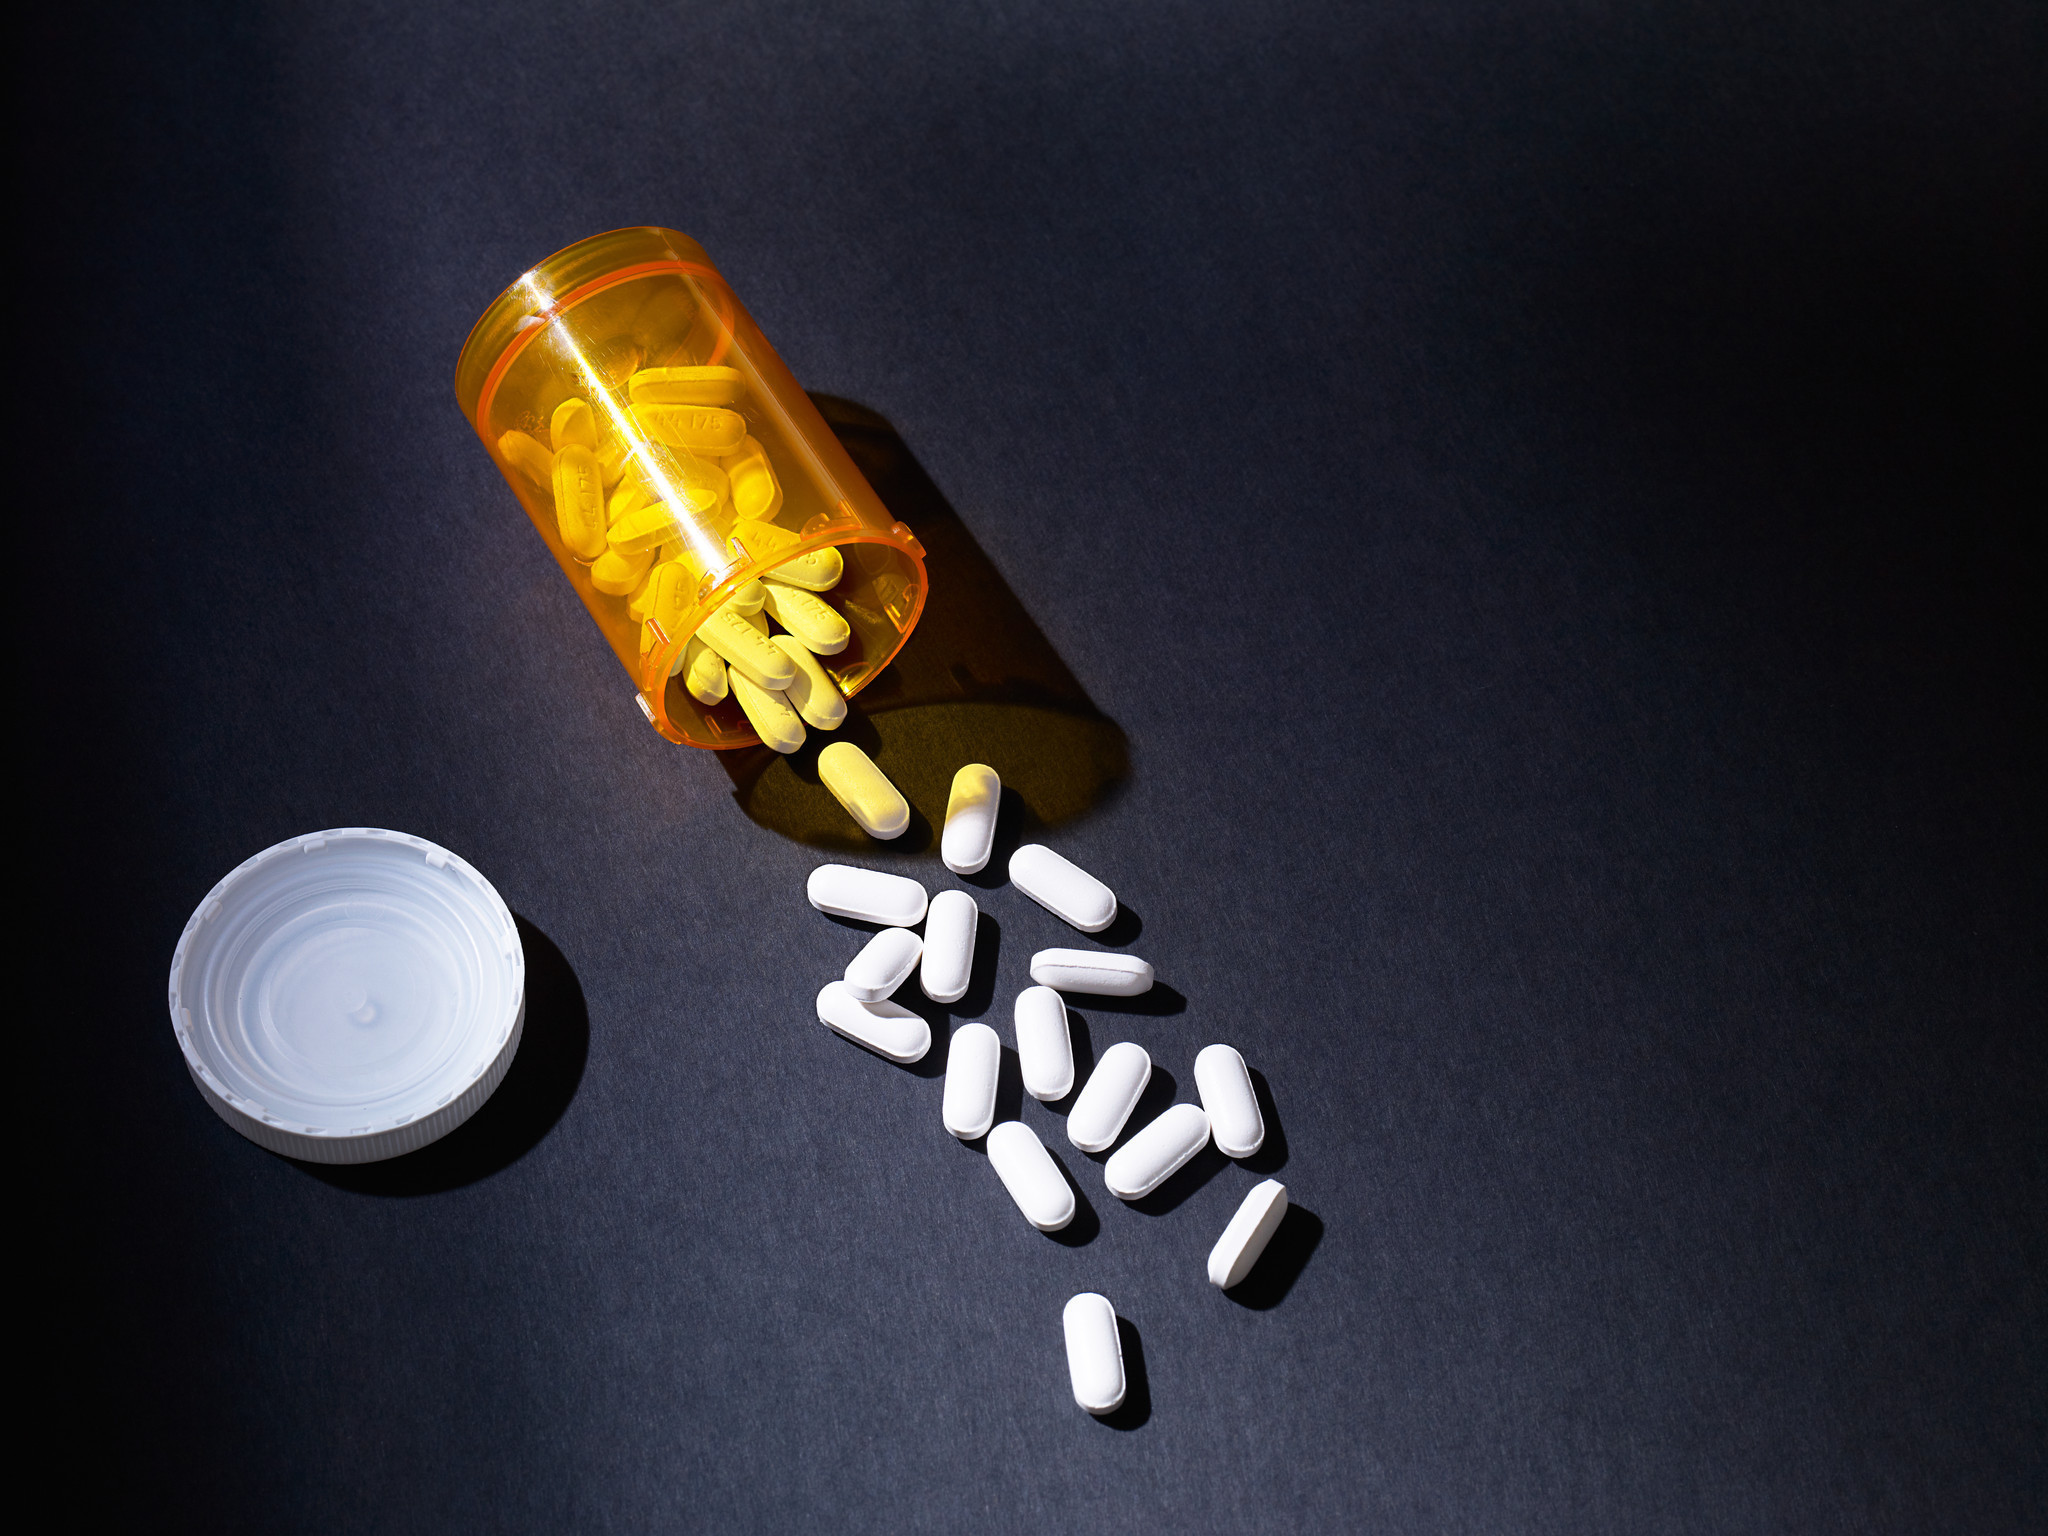 What are some highly rated pain relief medications according to experts?